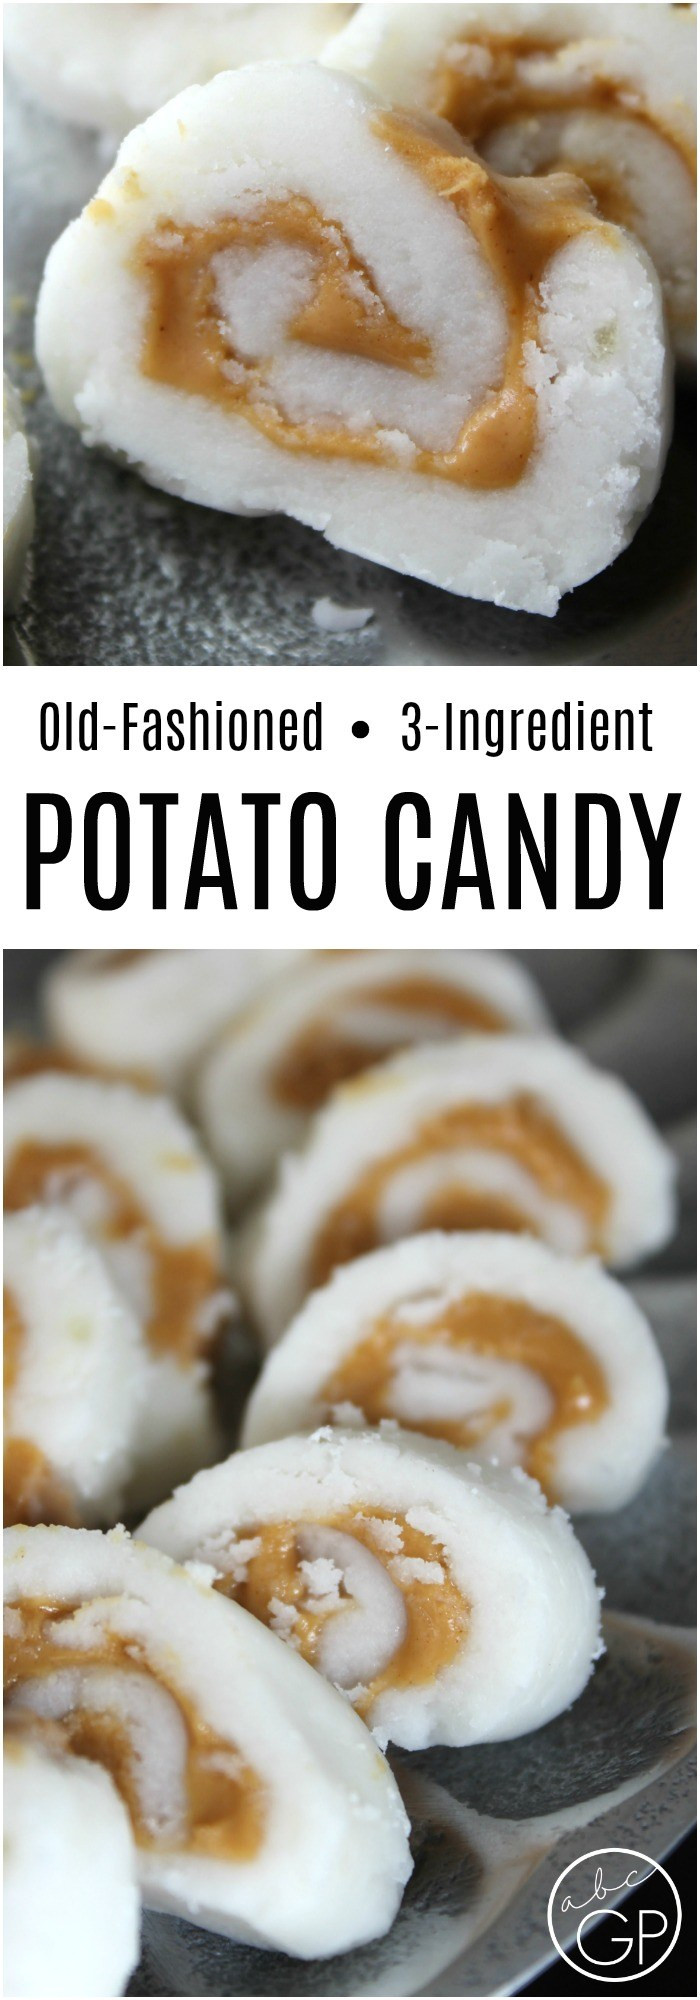 Old Fashioned Christmas Candy Recipes
 3 Ingre nt Old fashioned Potato Candy Recipe